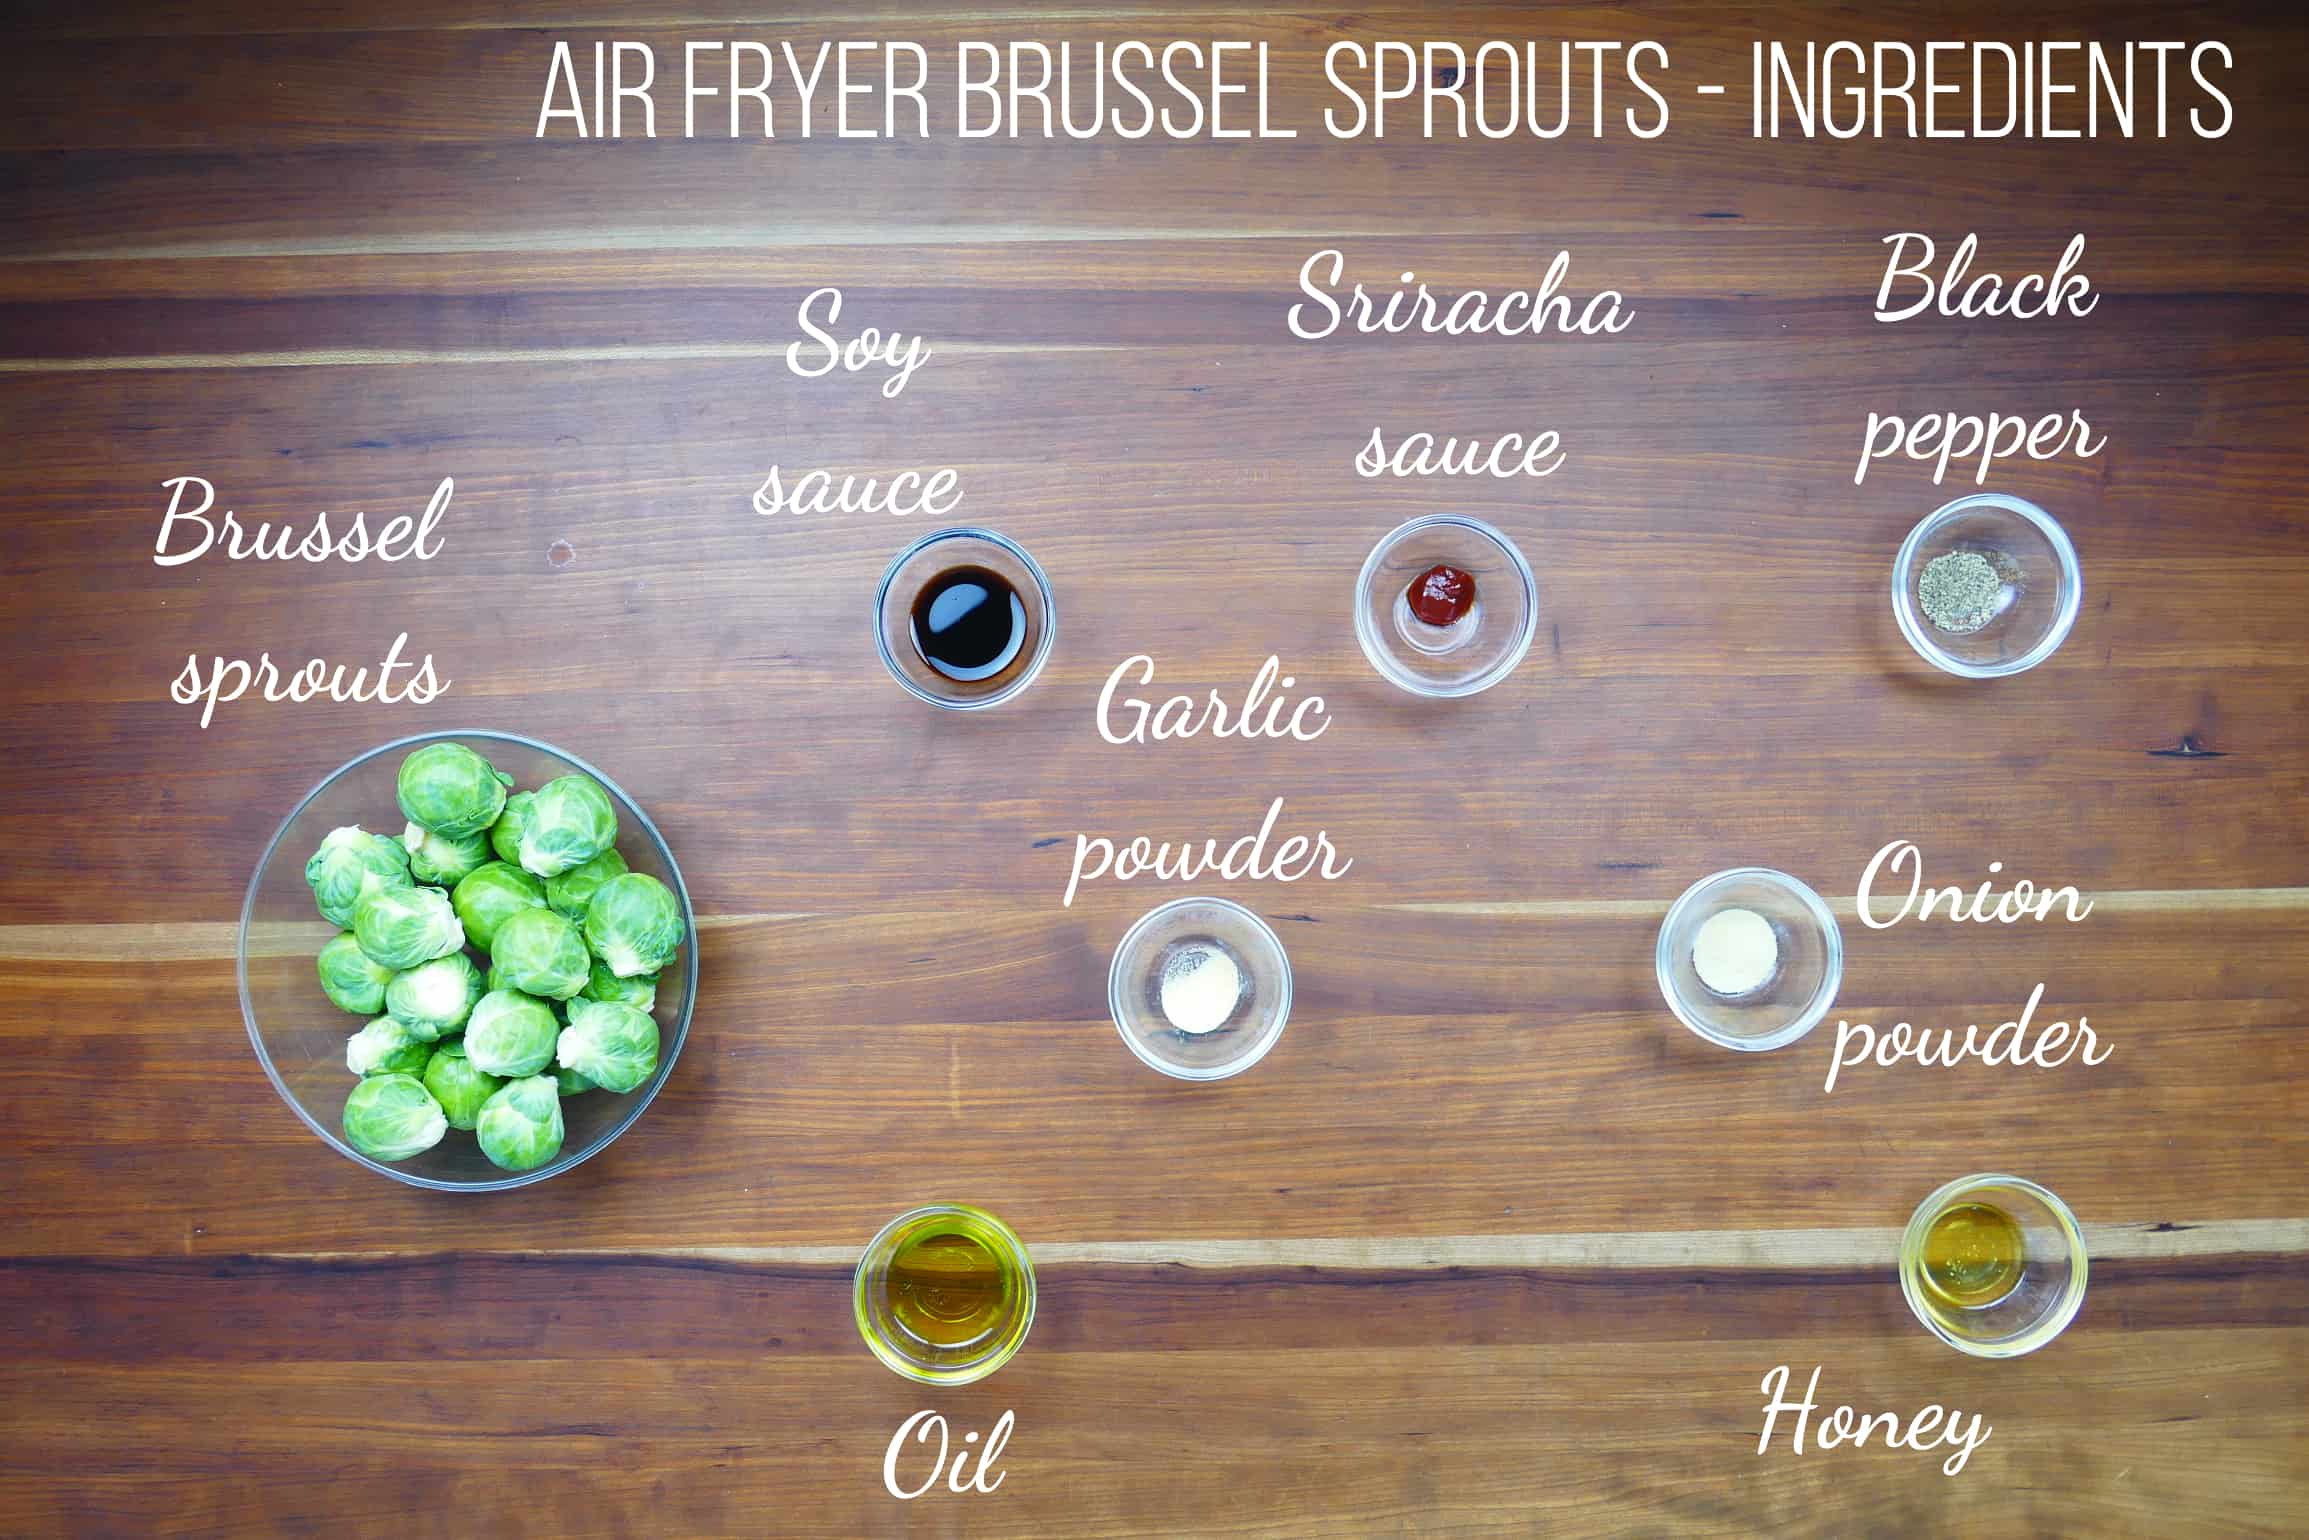 Air fryer brussel sprouts ingredients - brussel sprouts, soy sauce, sriracha sauce, black pepper, garlic powder, onion powder, oil, honey